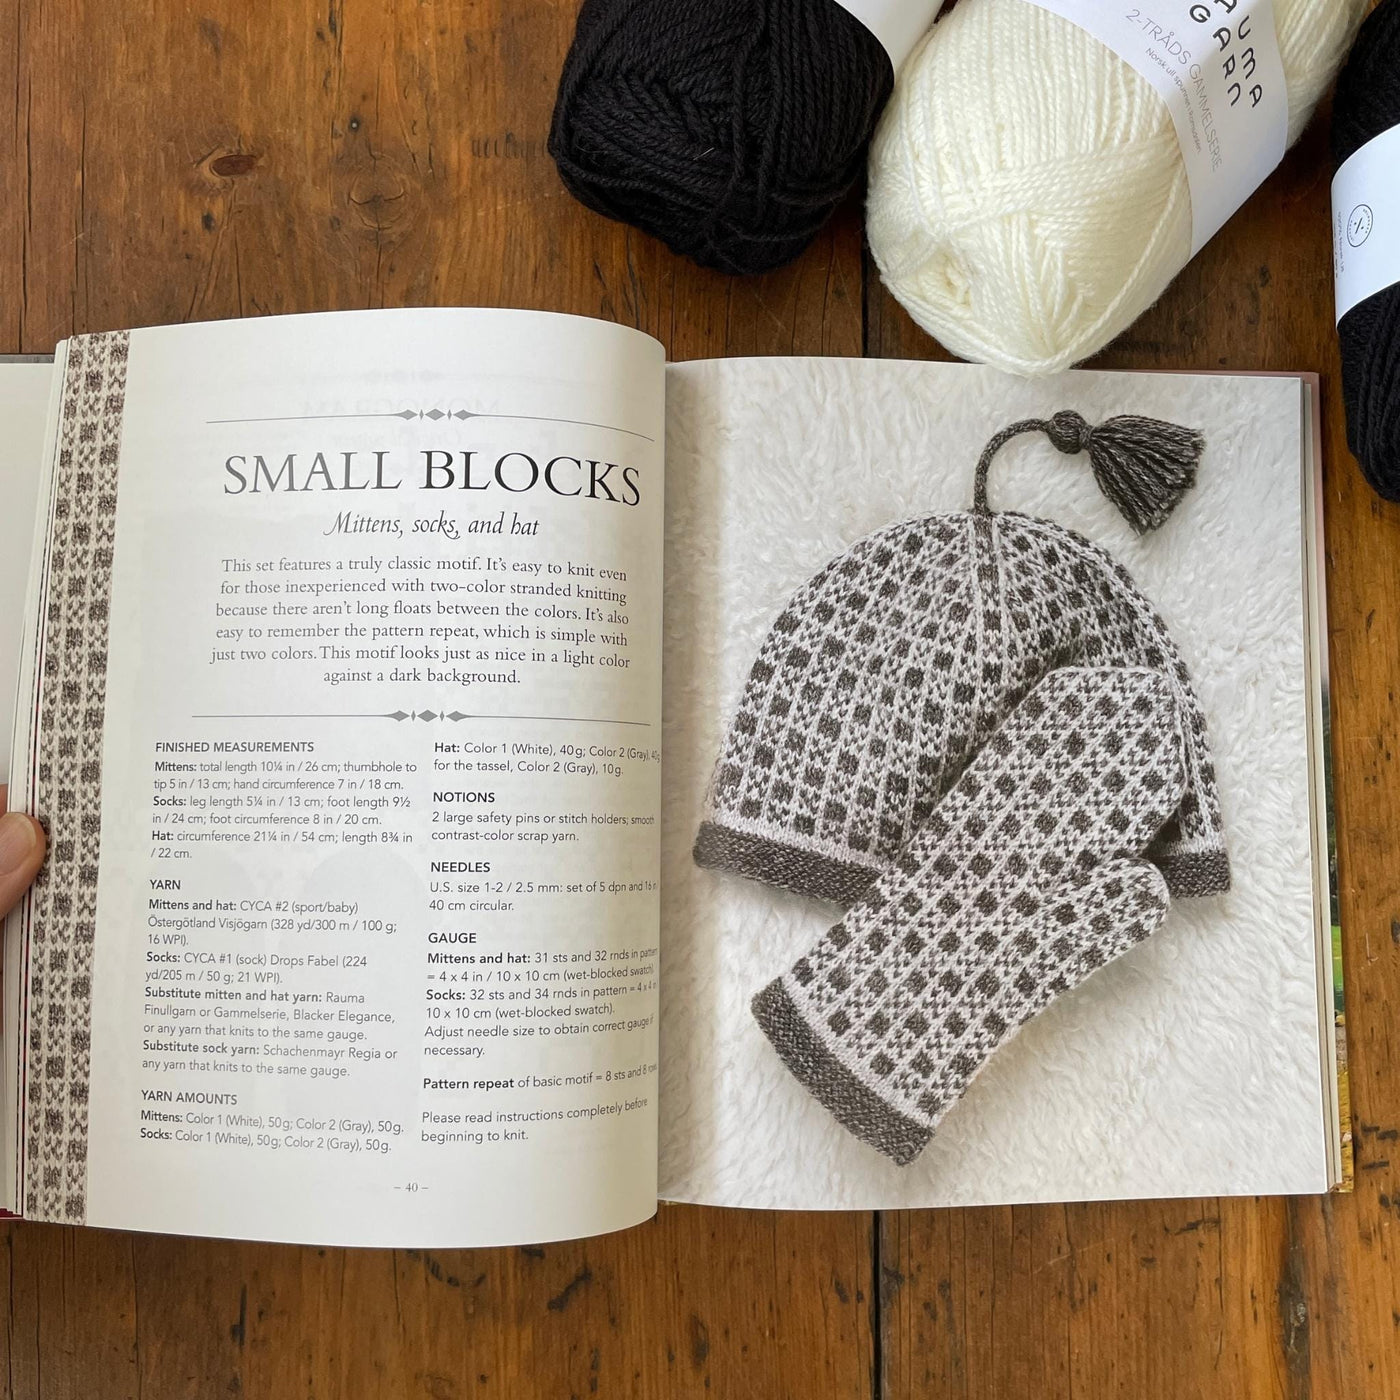 Page of Traditional Nordic Knits book with black and white colorwork mittens and hat with yarn beside book.